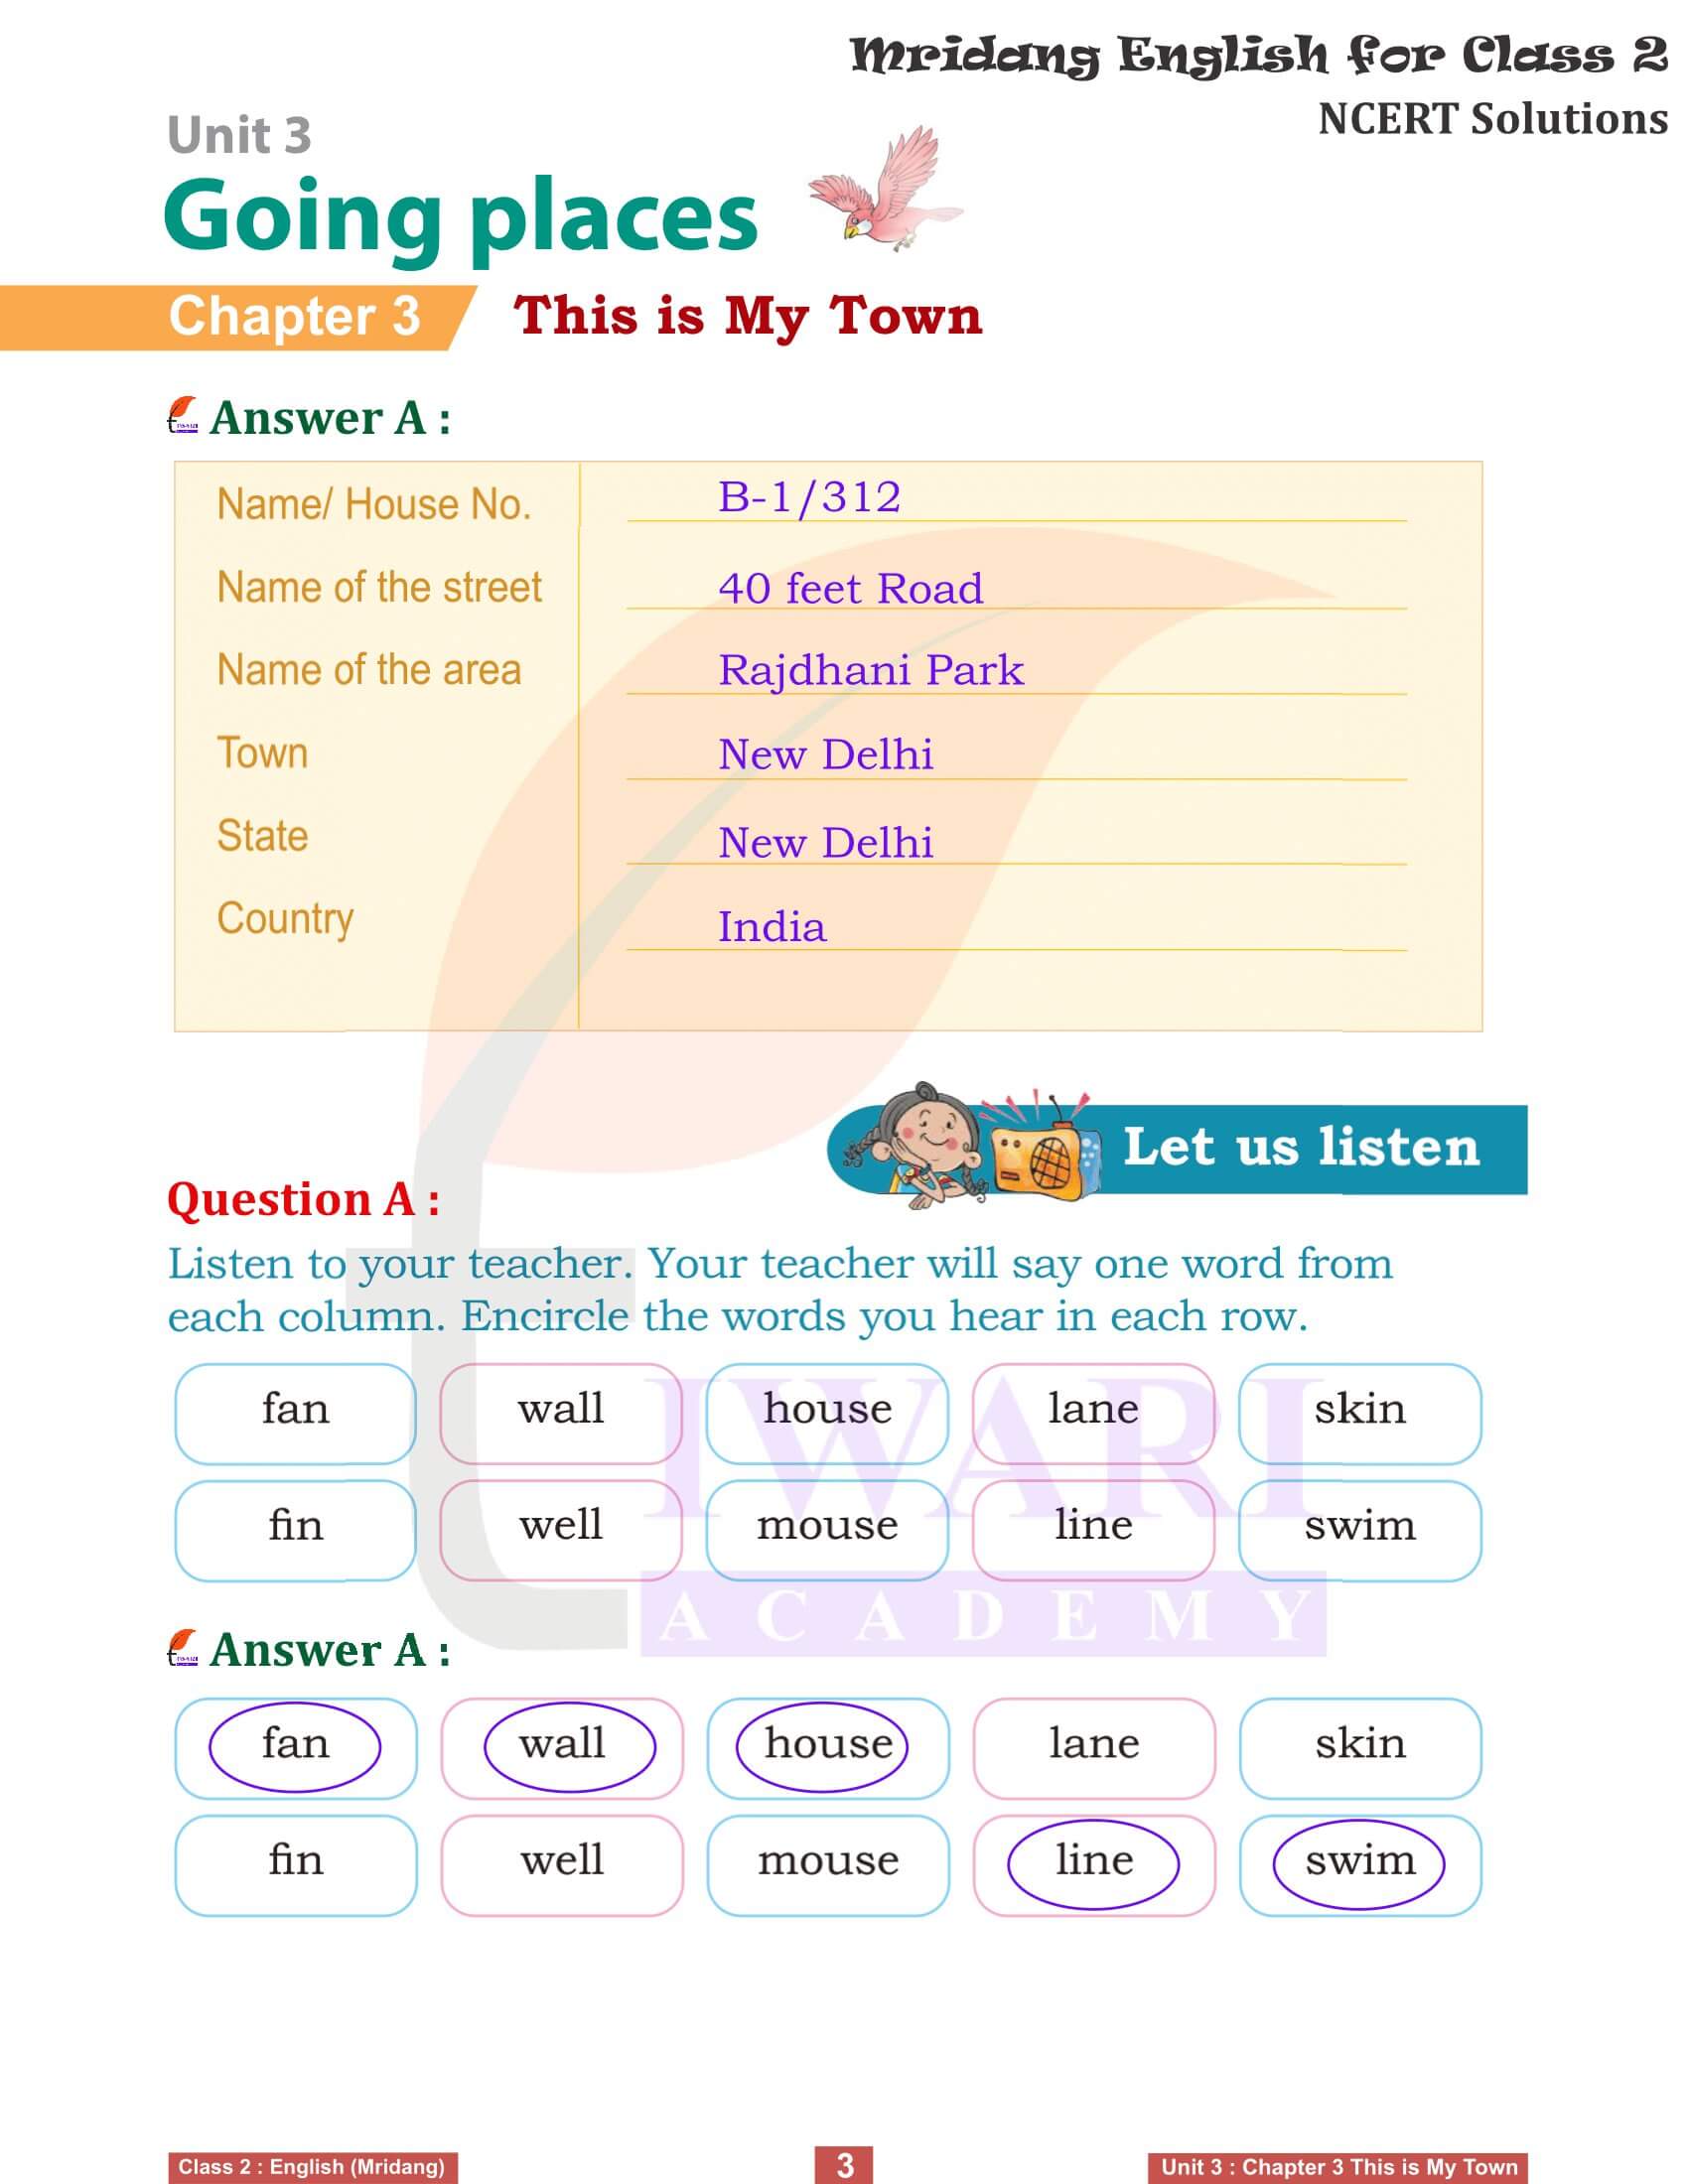 NCERT Solutions for Class 2 English Mridang Unit 3 Going Places Chapter 3 Question Answers